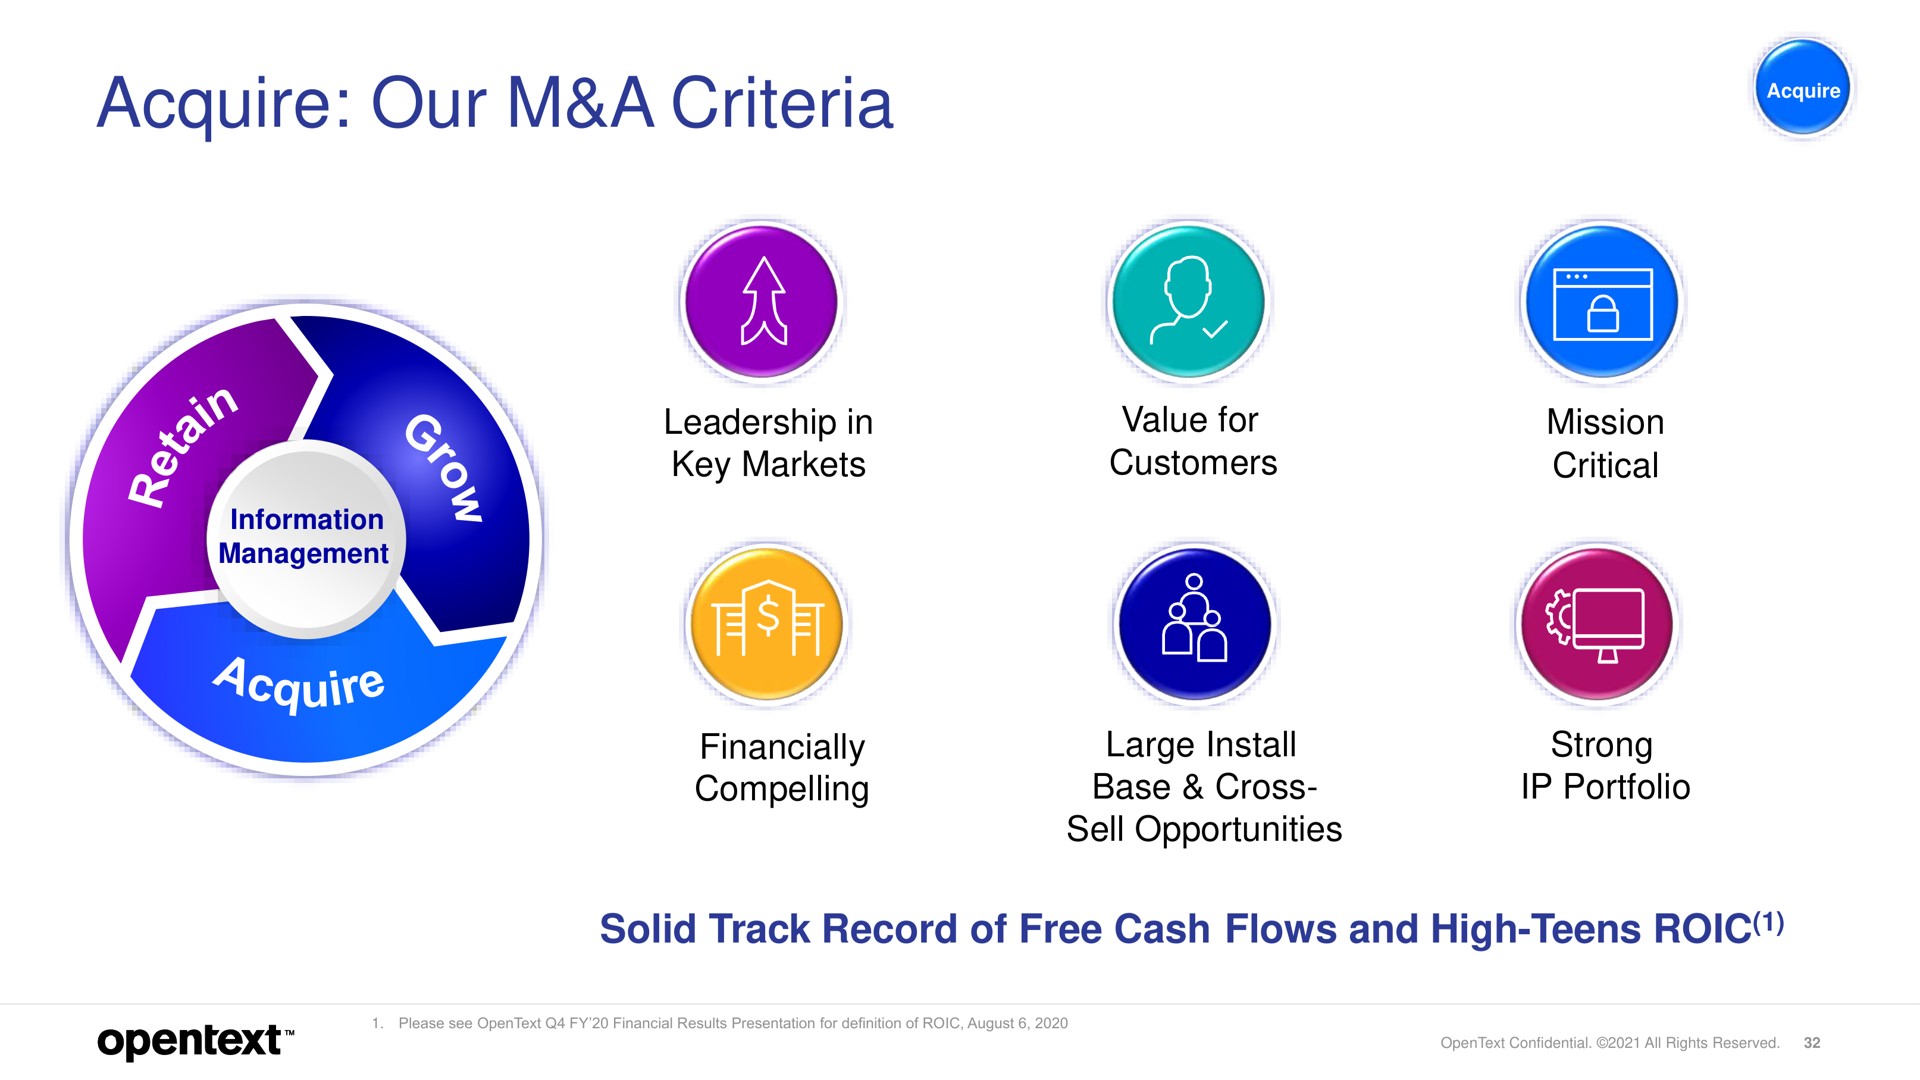 acquire our a criteria solid track record of free cash flows and high teens | OpenText